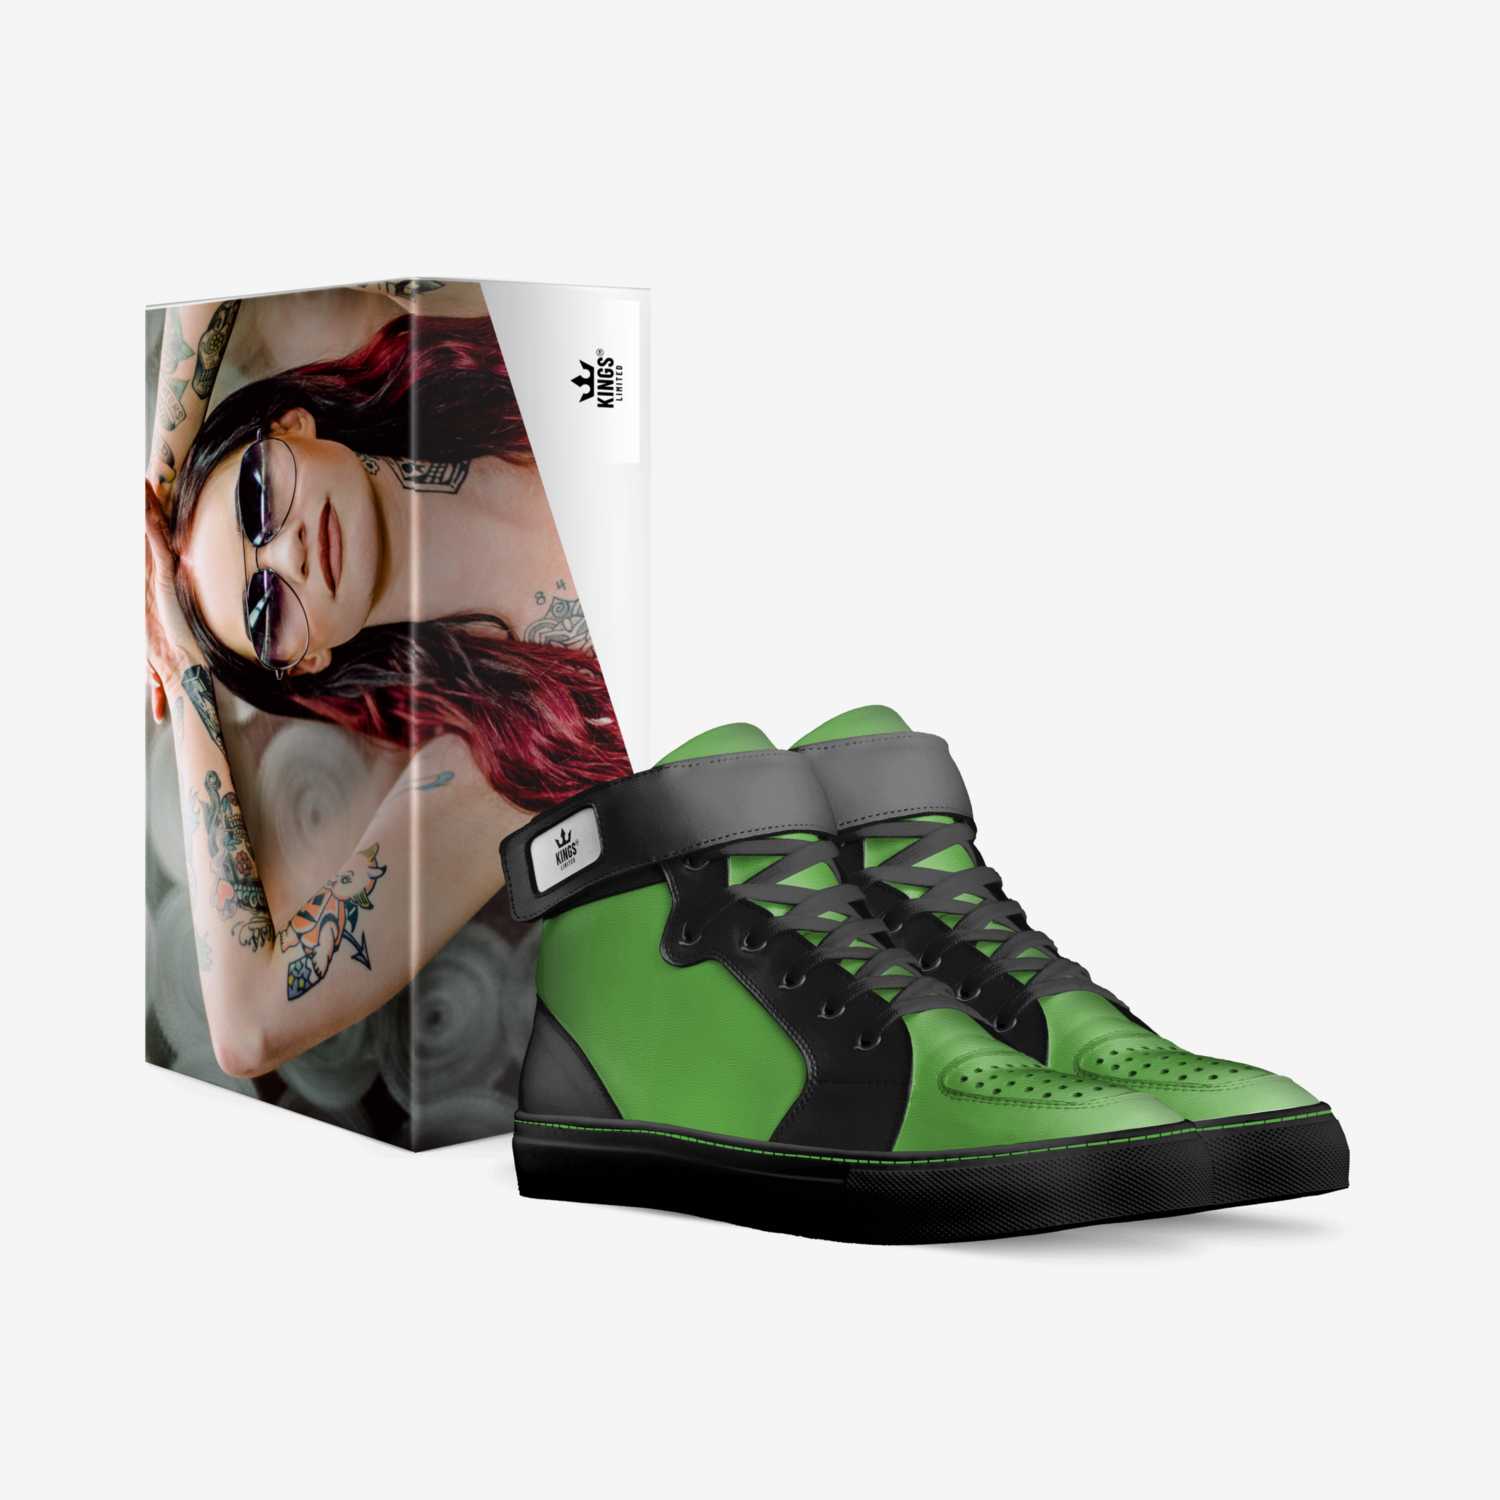 Kings Limited™ custom made in Italy shoes by Alex Parker | Box view